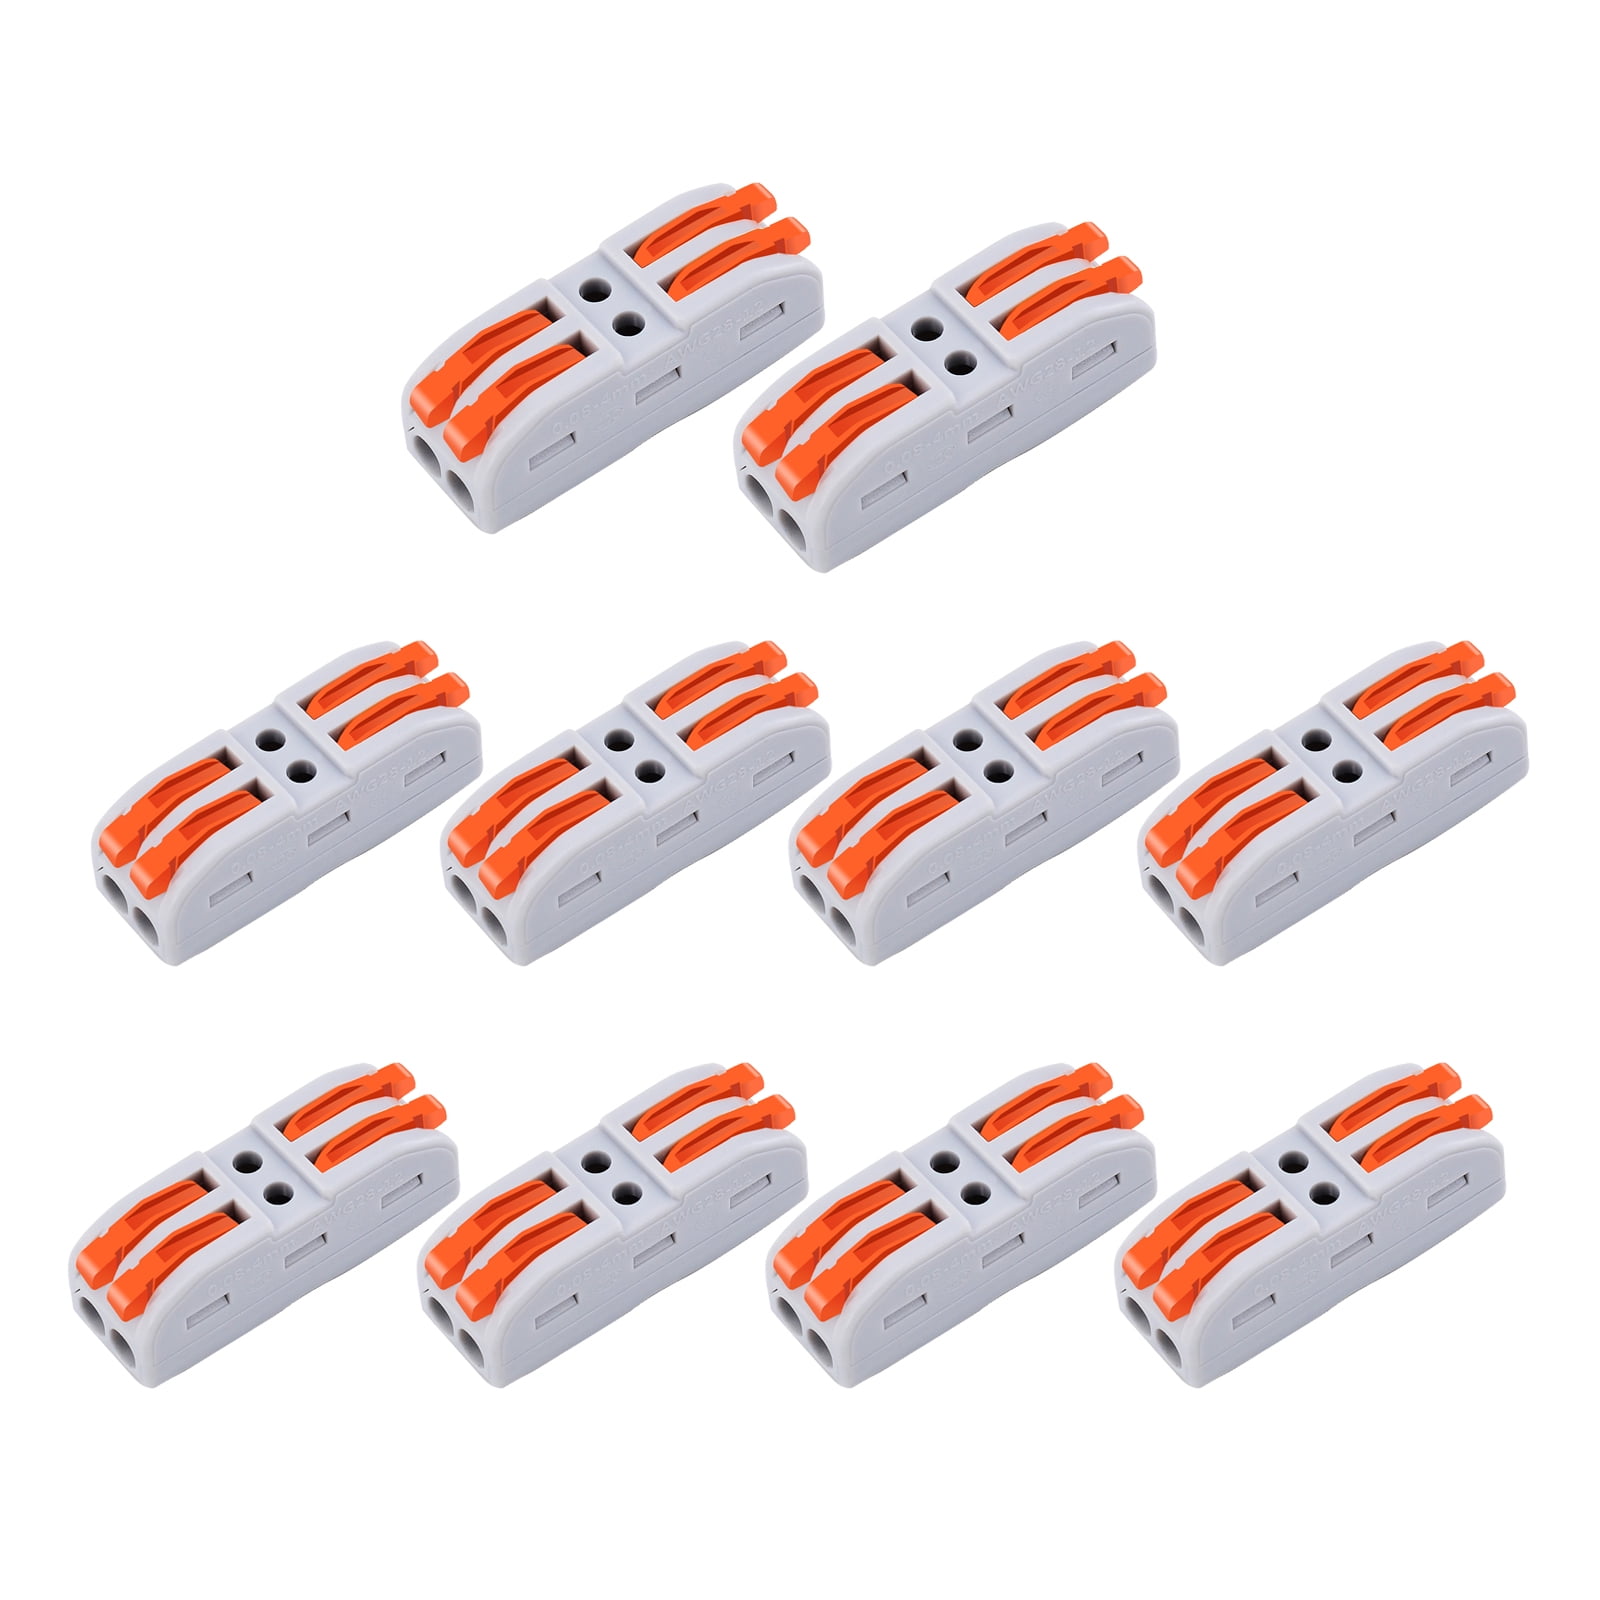 LuoQiuFa 10Pcs Lever Nut Connector Assortment Conductors Compact Wire one-to-one Quick Terminal Block Splicing Type Multi-Function Soft and Hard Wire Universal PCT-221 